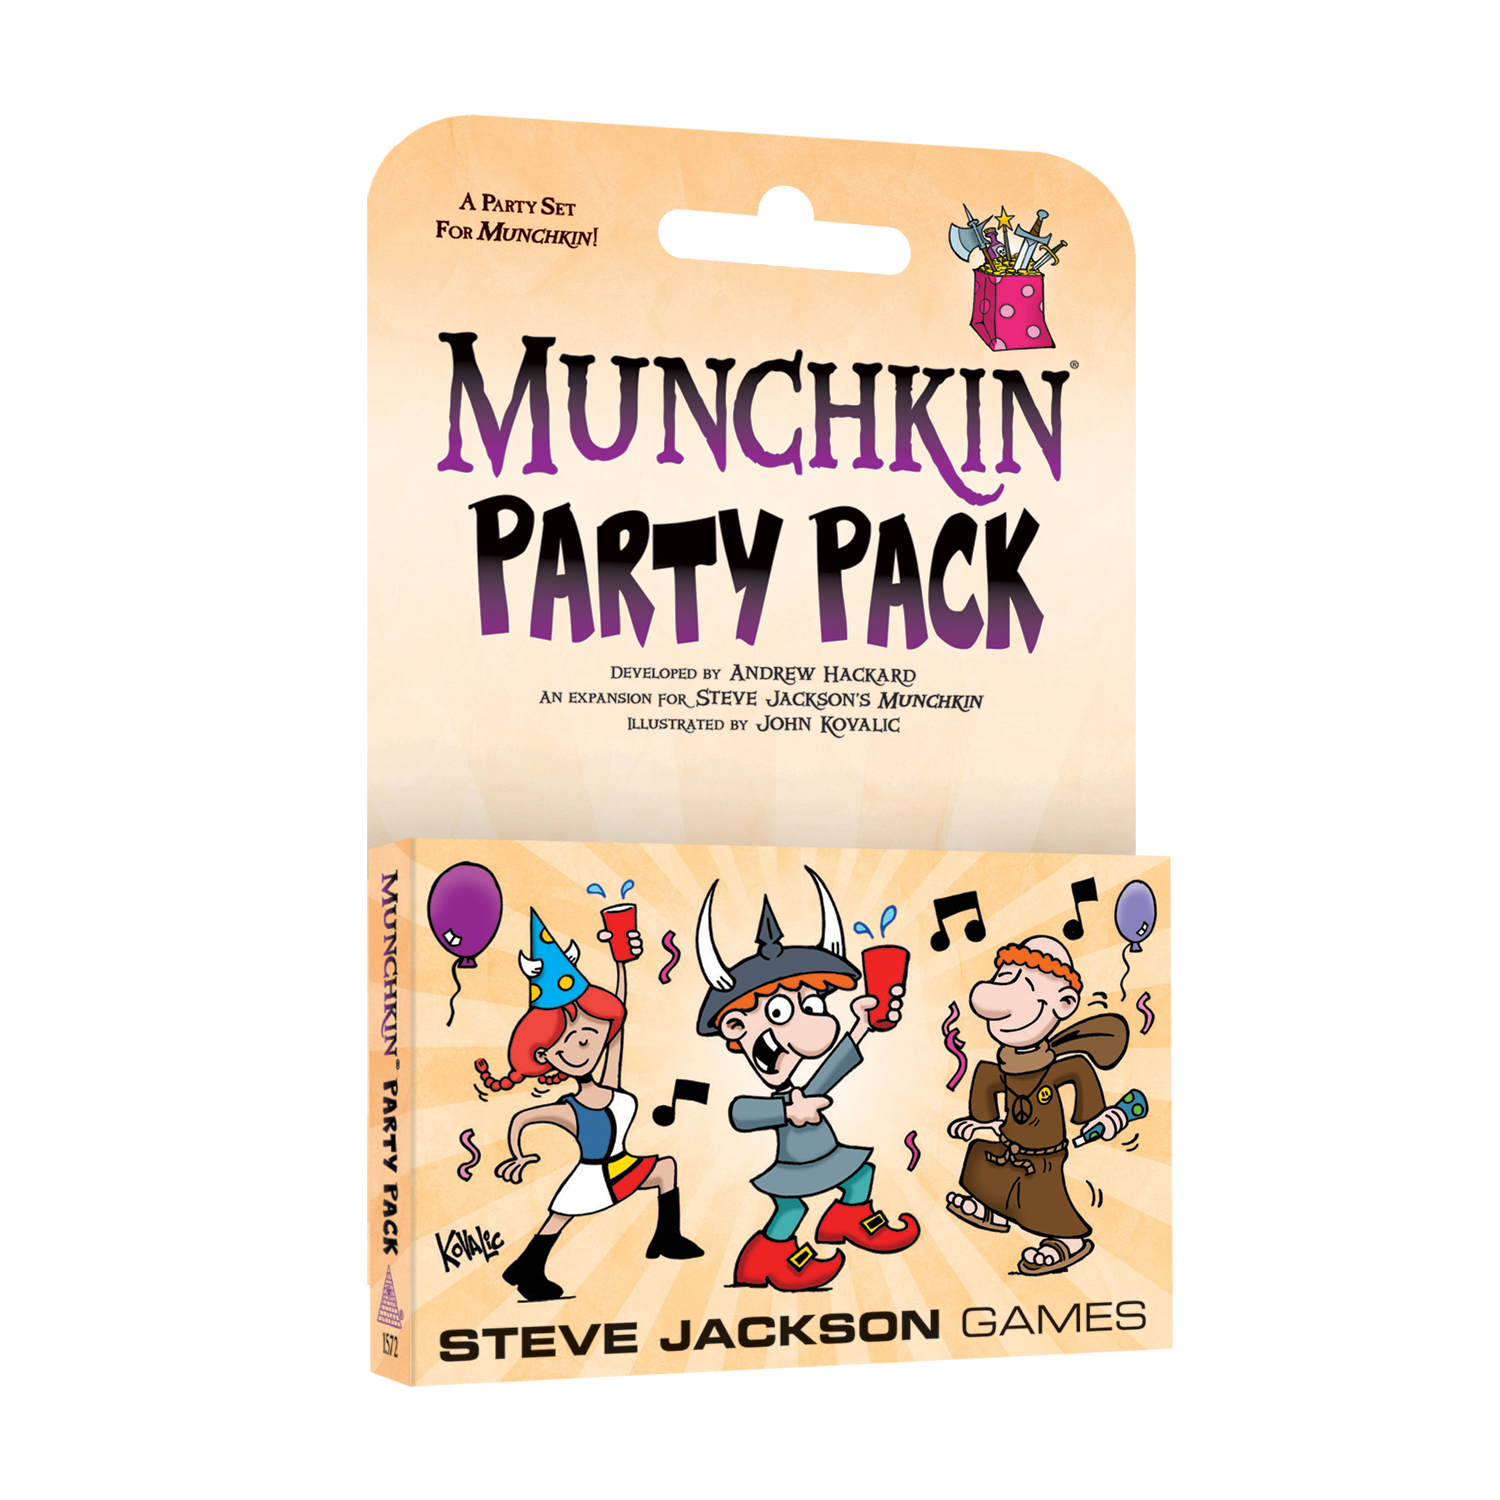 MUNCHKIN PARTY PACK